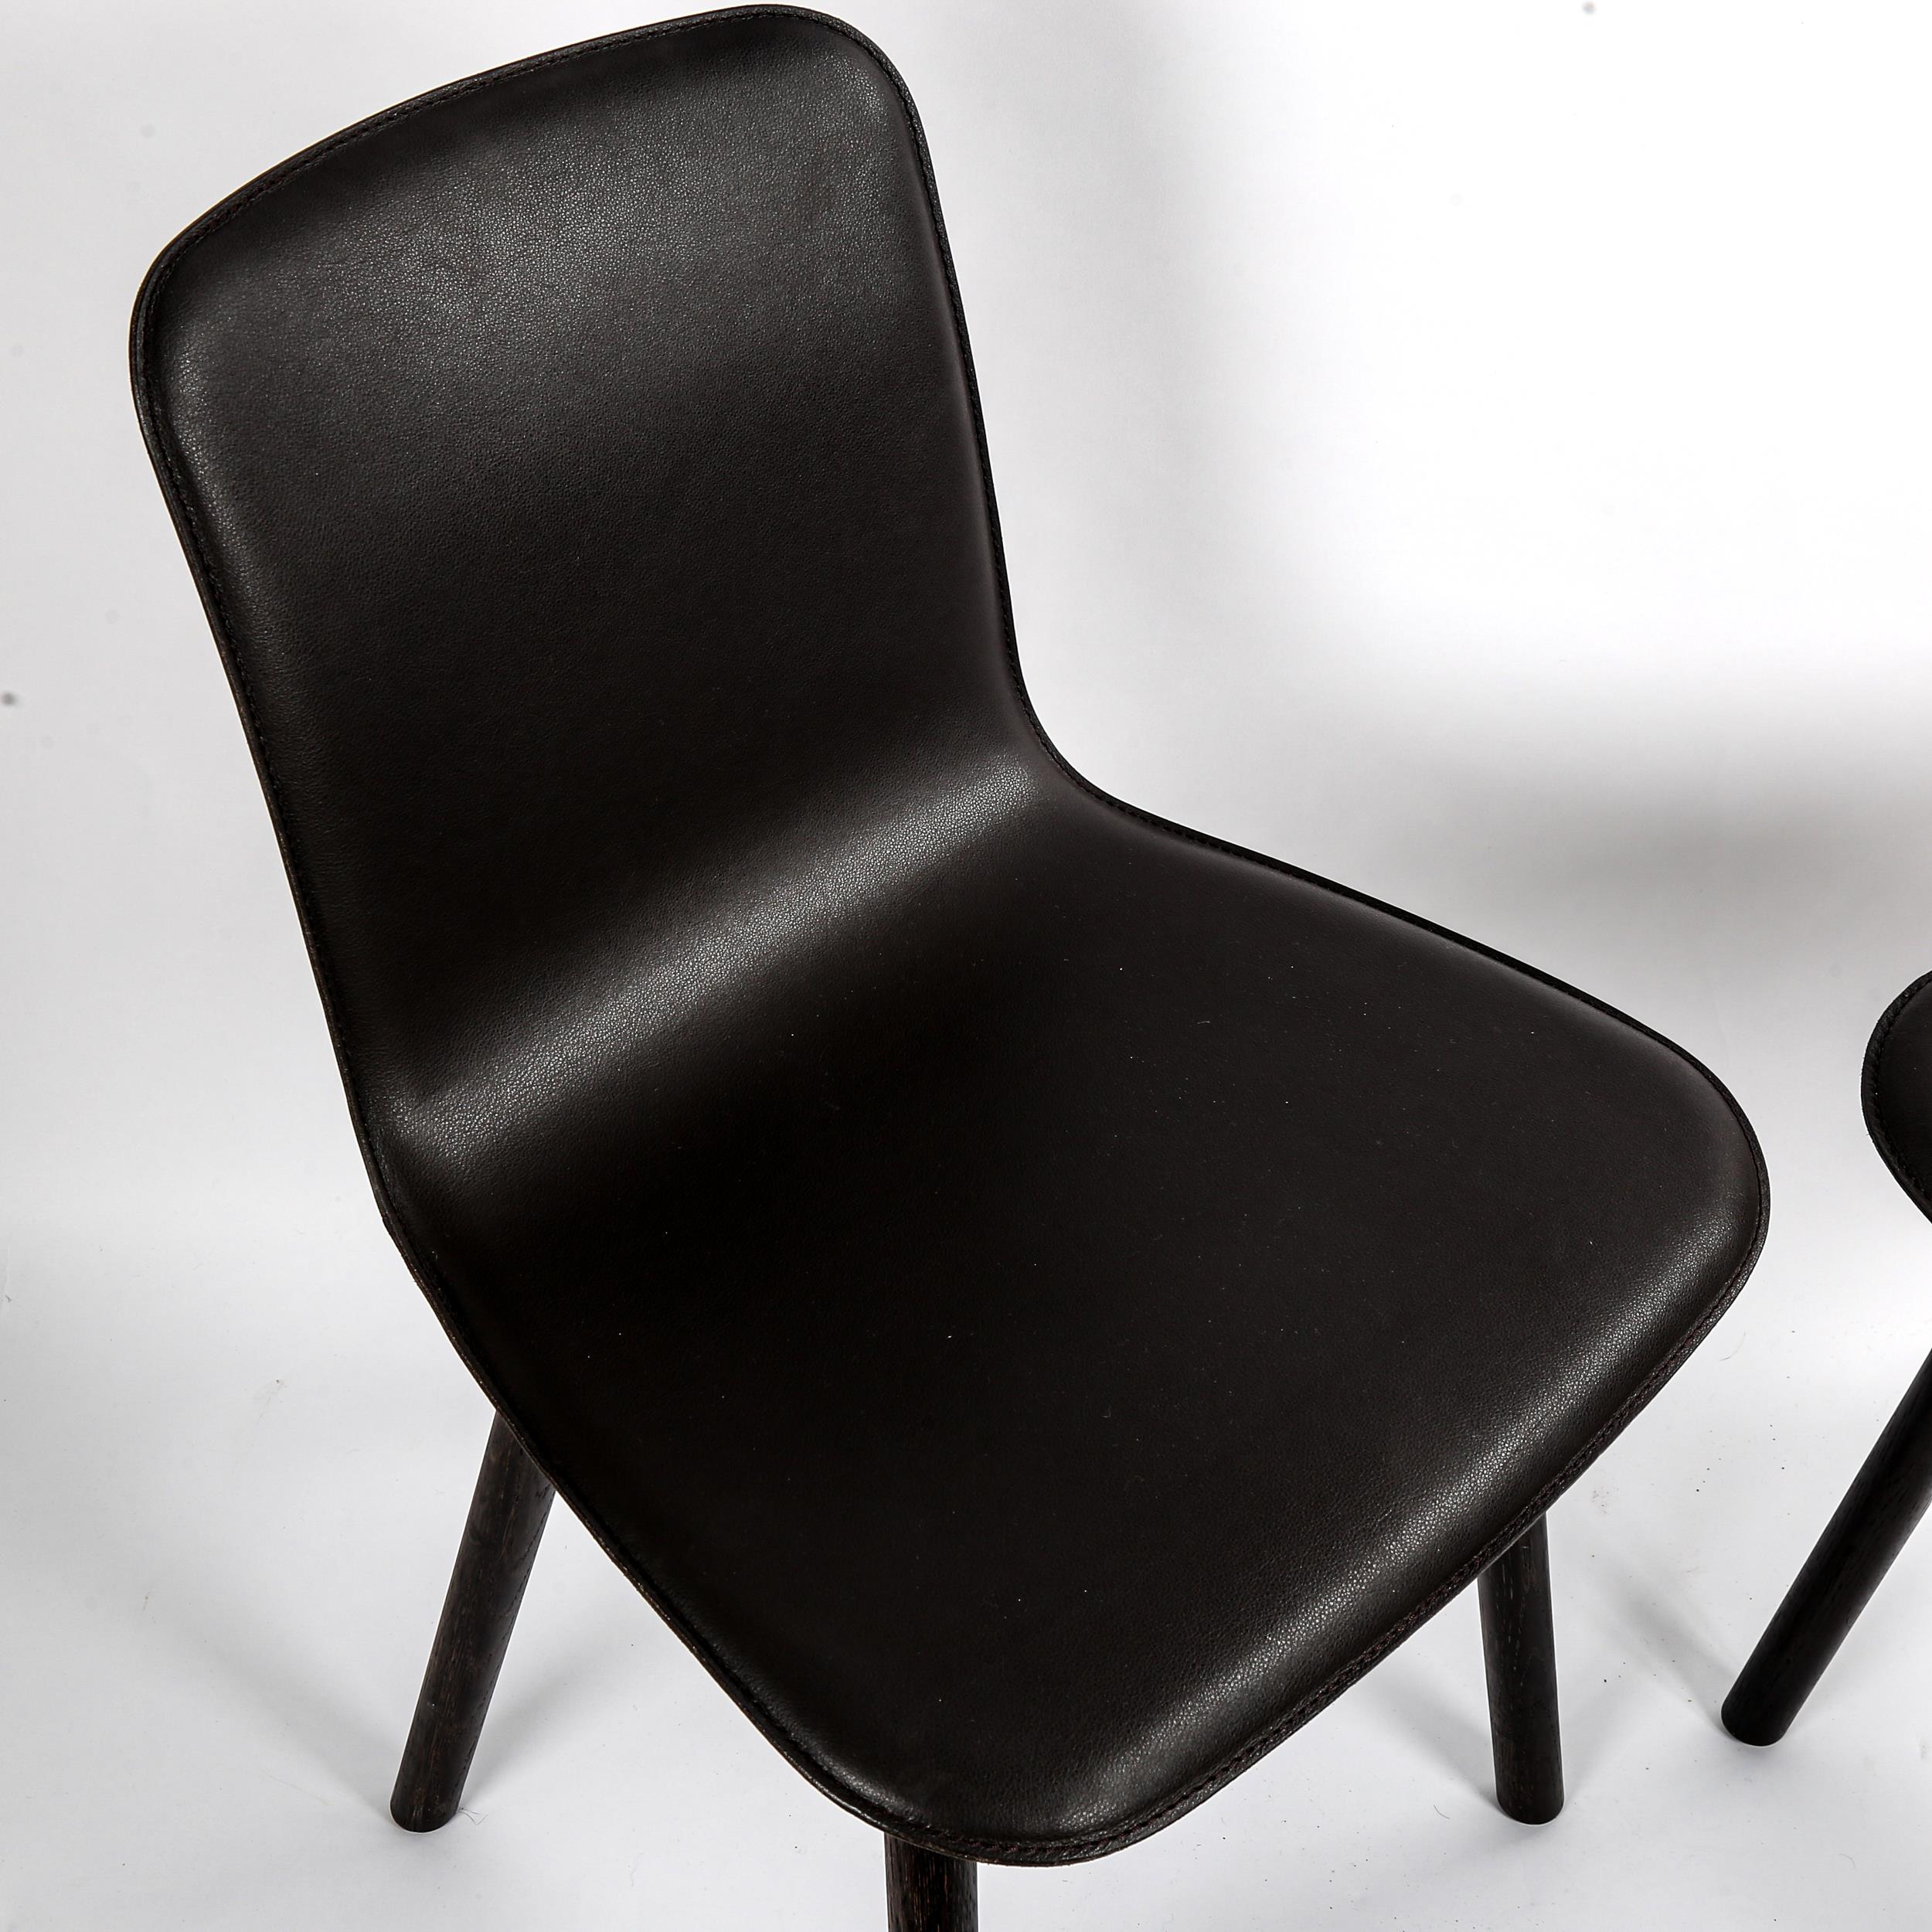 JASPER MORRISON for Vitra, a pair of Hal leather and wood side chairs, with impressed maker's - Image 2 of 4